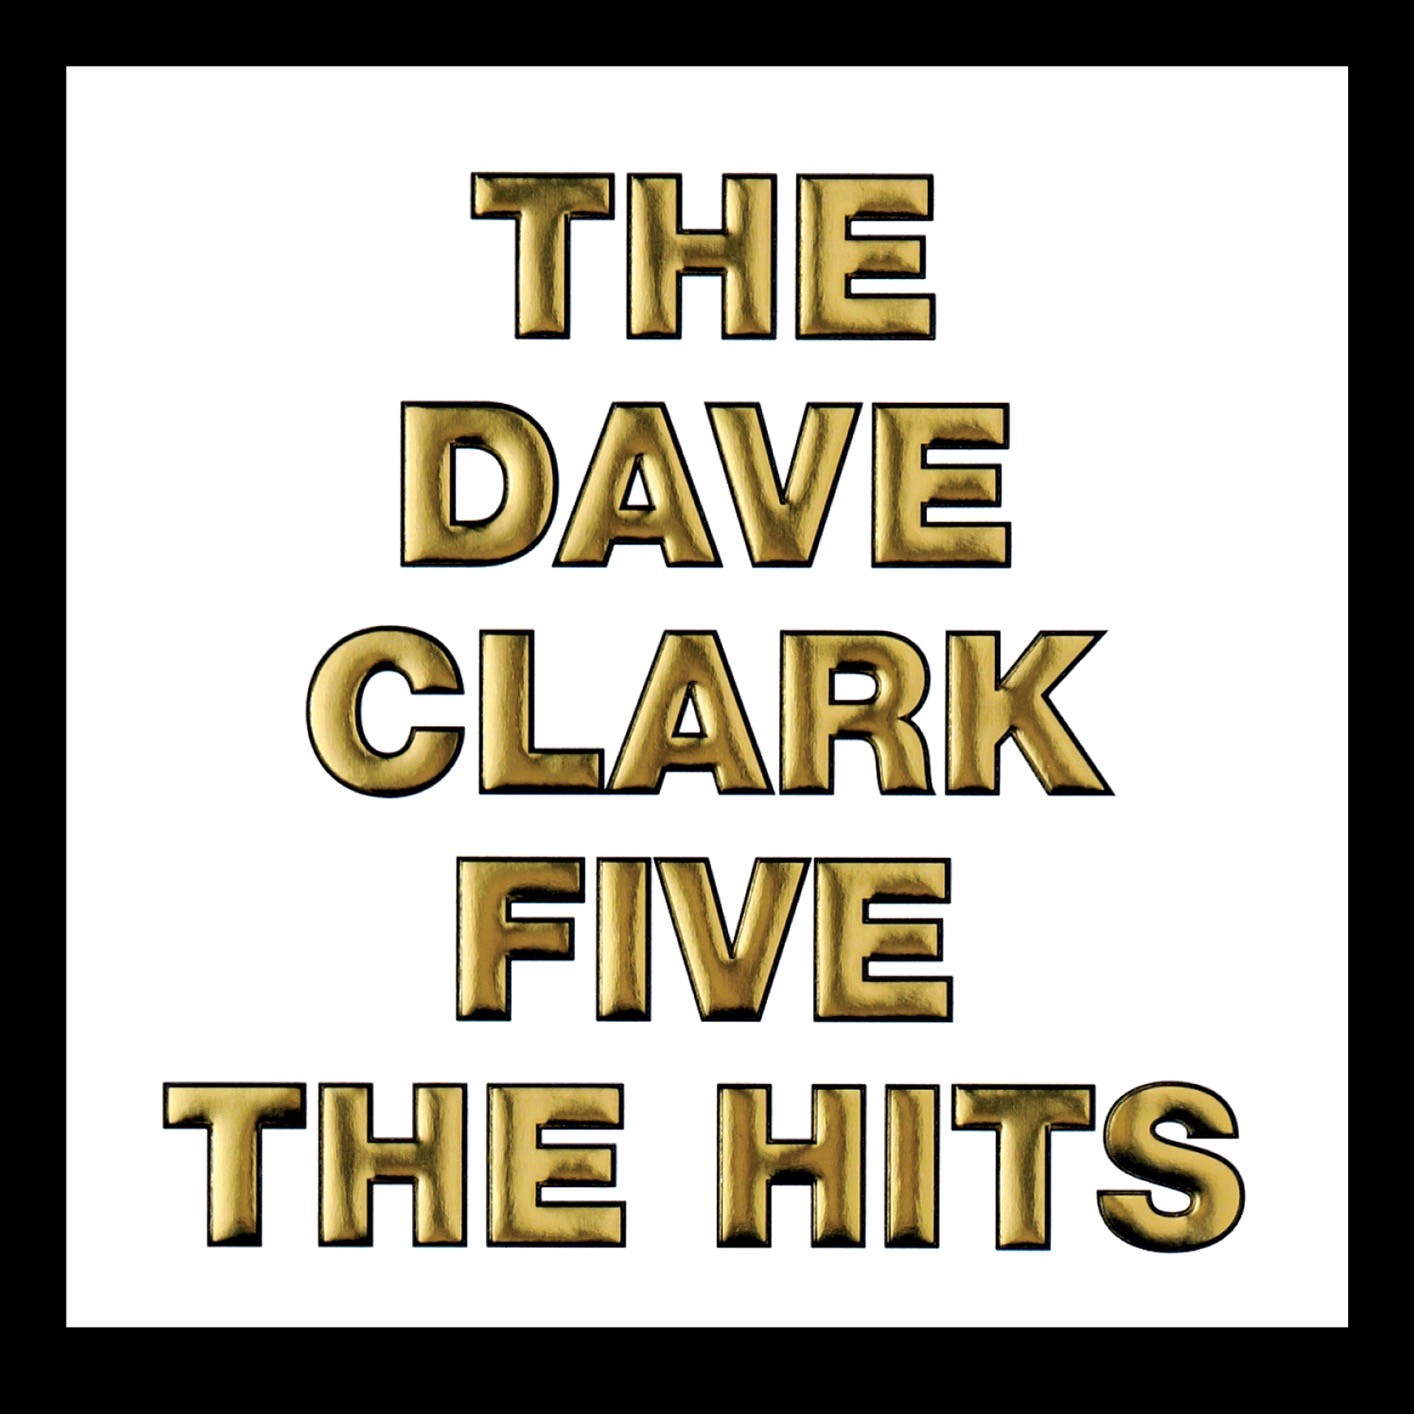 The Dave Clark Five - The Hits (Remastered) (2019) [FLAC 24bit/96kHz]